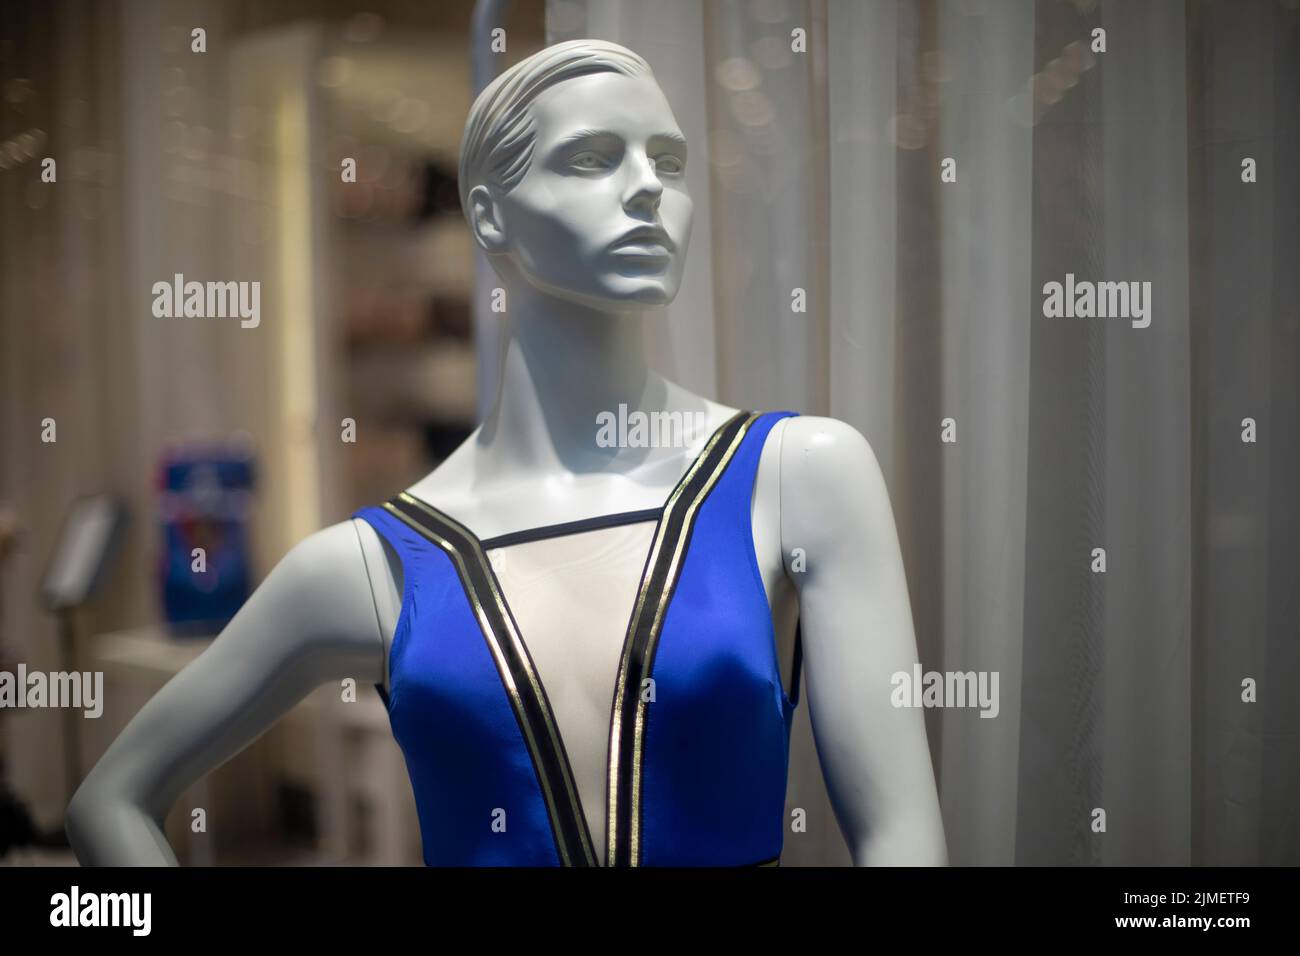 Women's mannequin in clothing store. Plastic figure of woman. Store details. Demonstration of clothes. Style and fashion on mannequin. Stock Photo